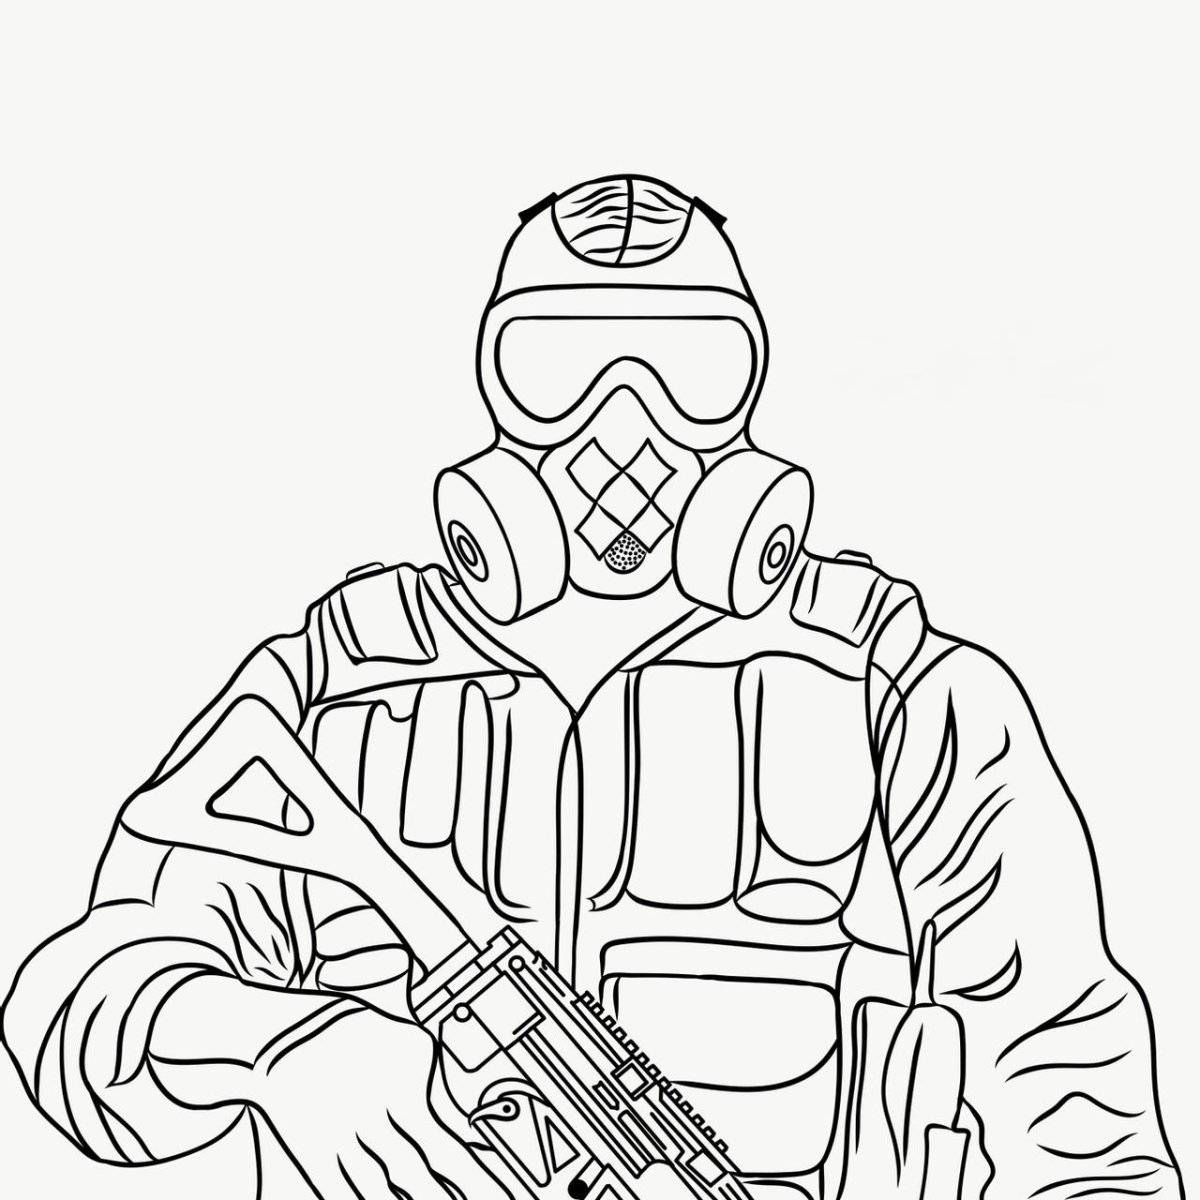 Majestic standoff 2 logo coloring page